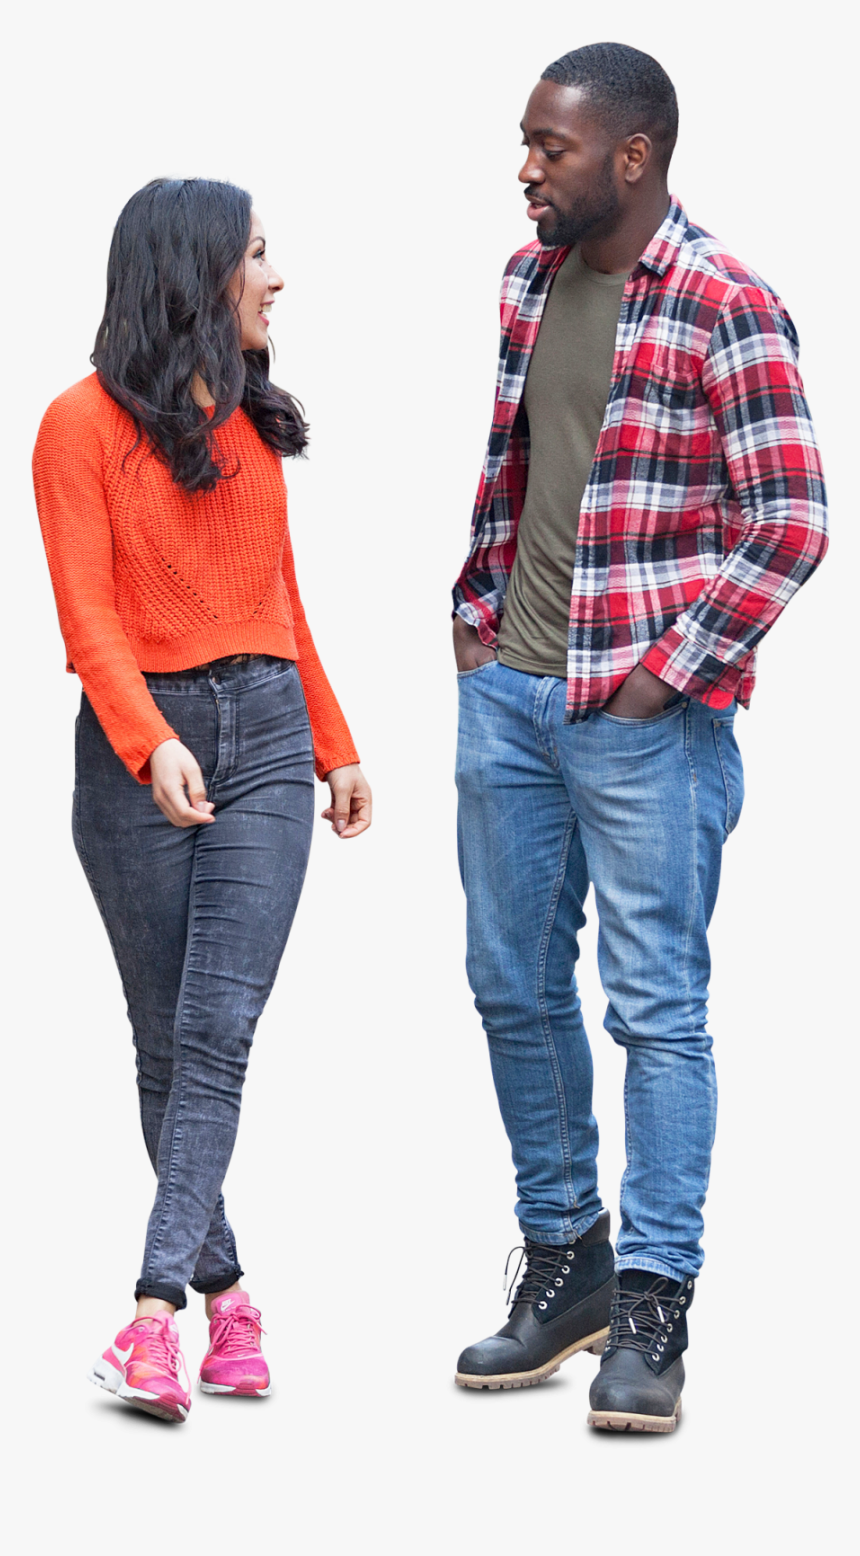 Cut Out Friends Couple Standing - Cut Out People Talking, HD Png Download, Free Download